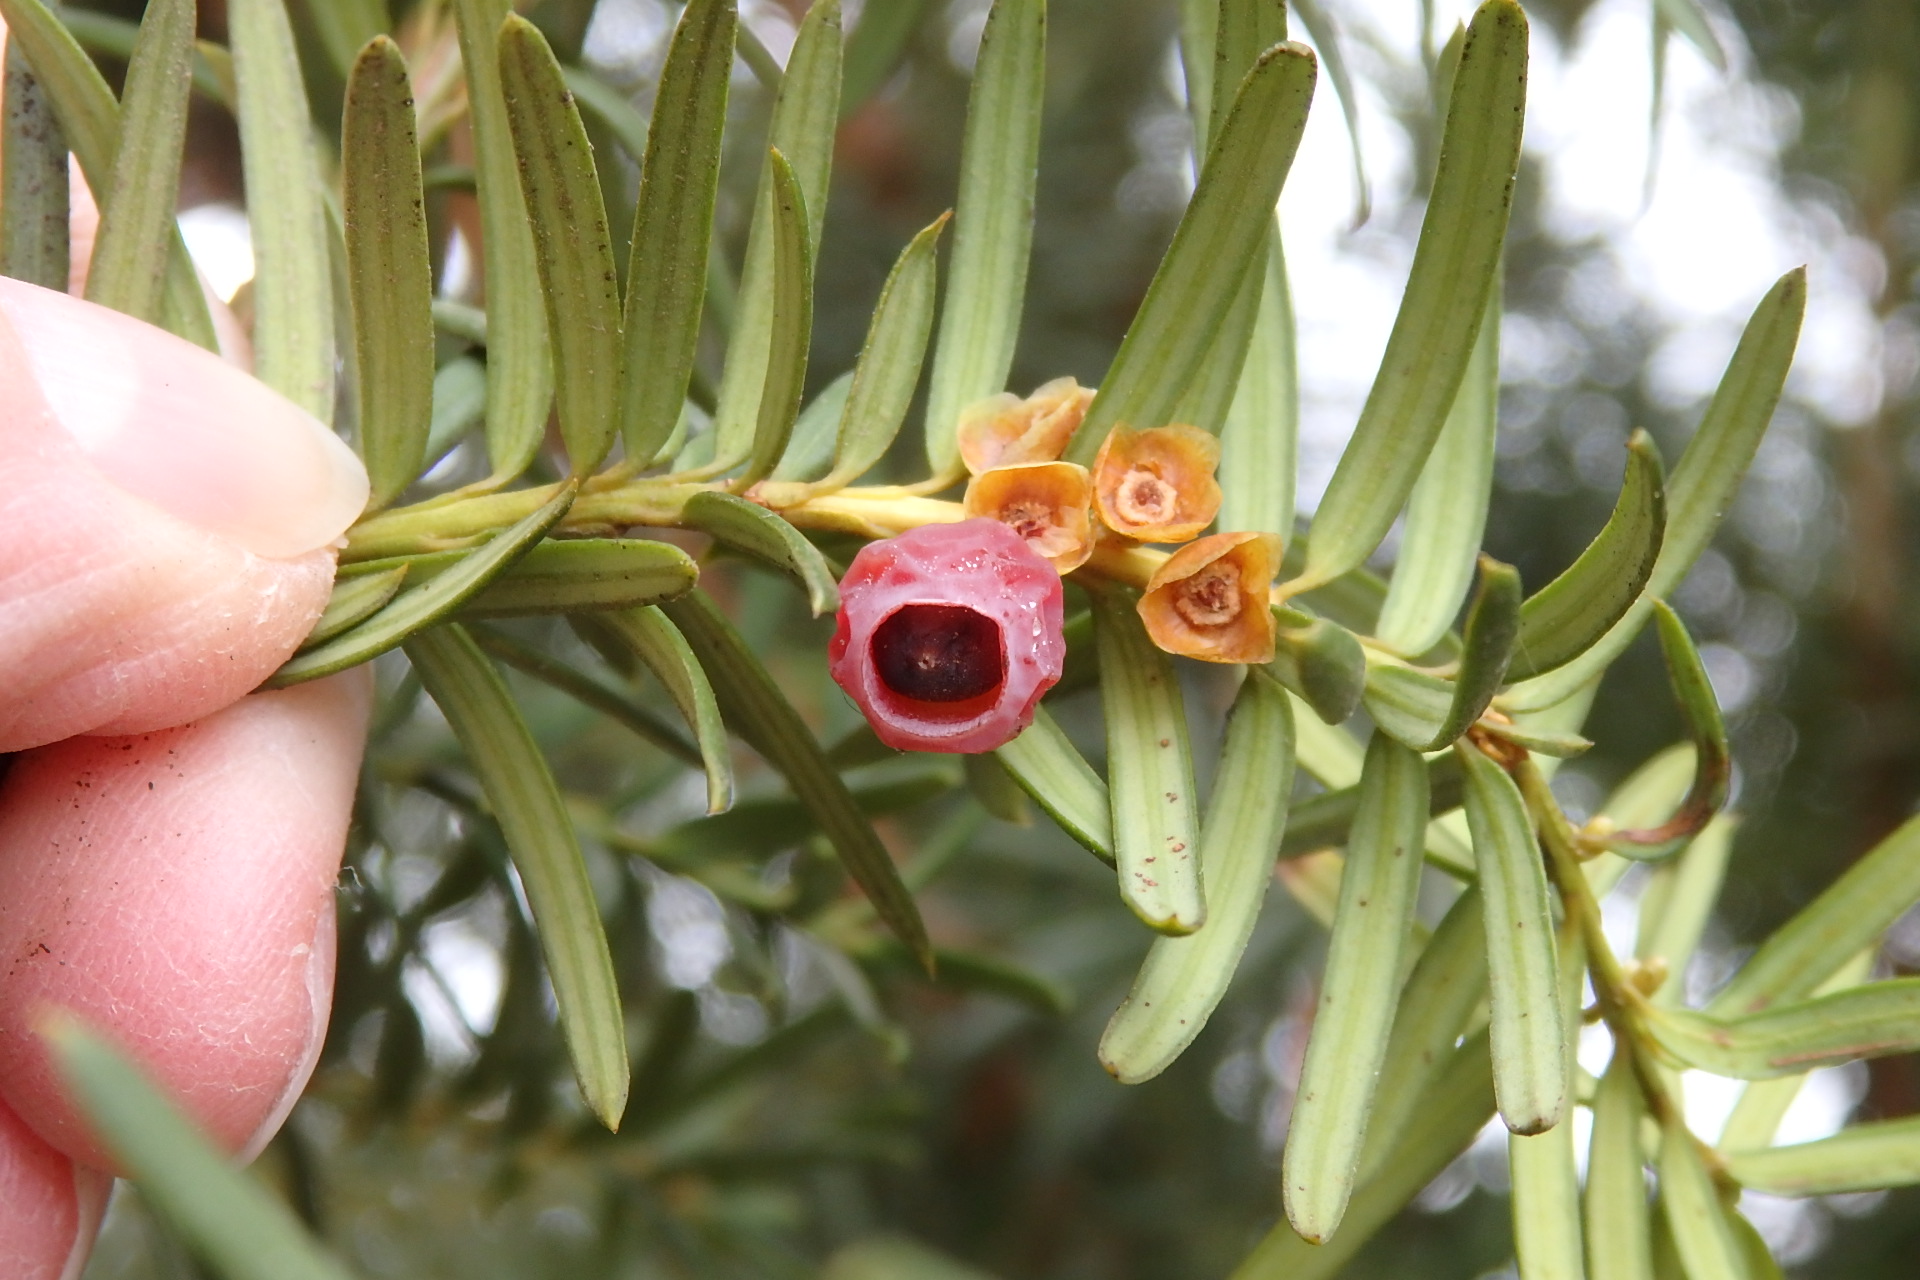 2_yew_leaves_seed_and_red_berry-like_aril_kinter_photo.jpg